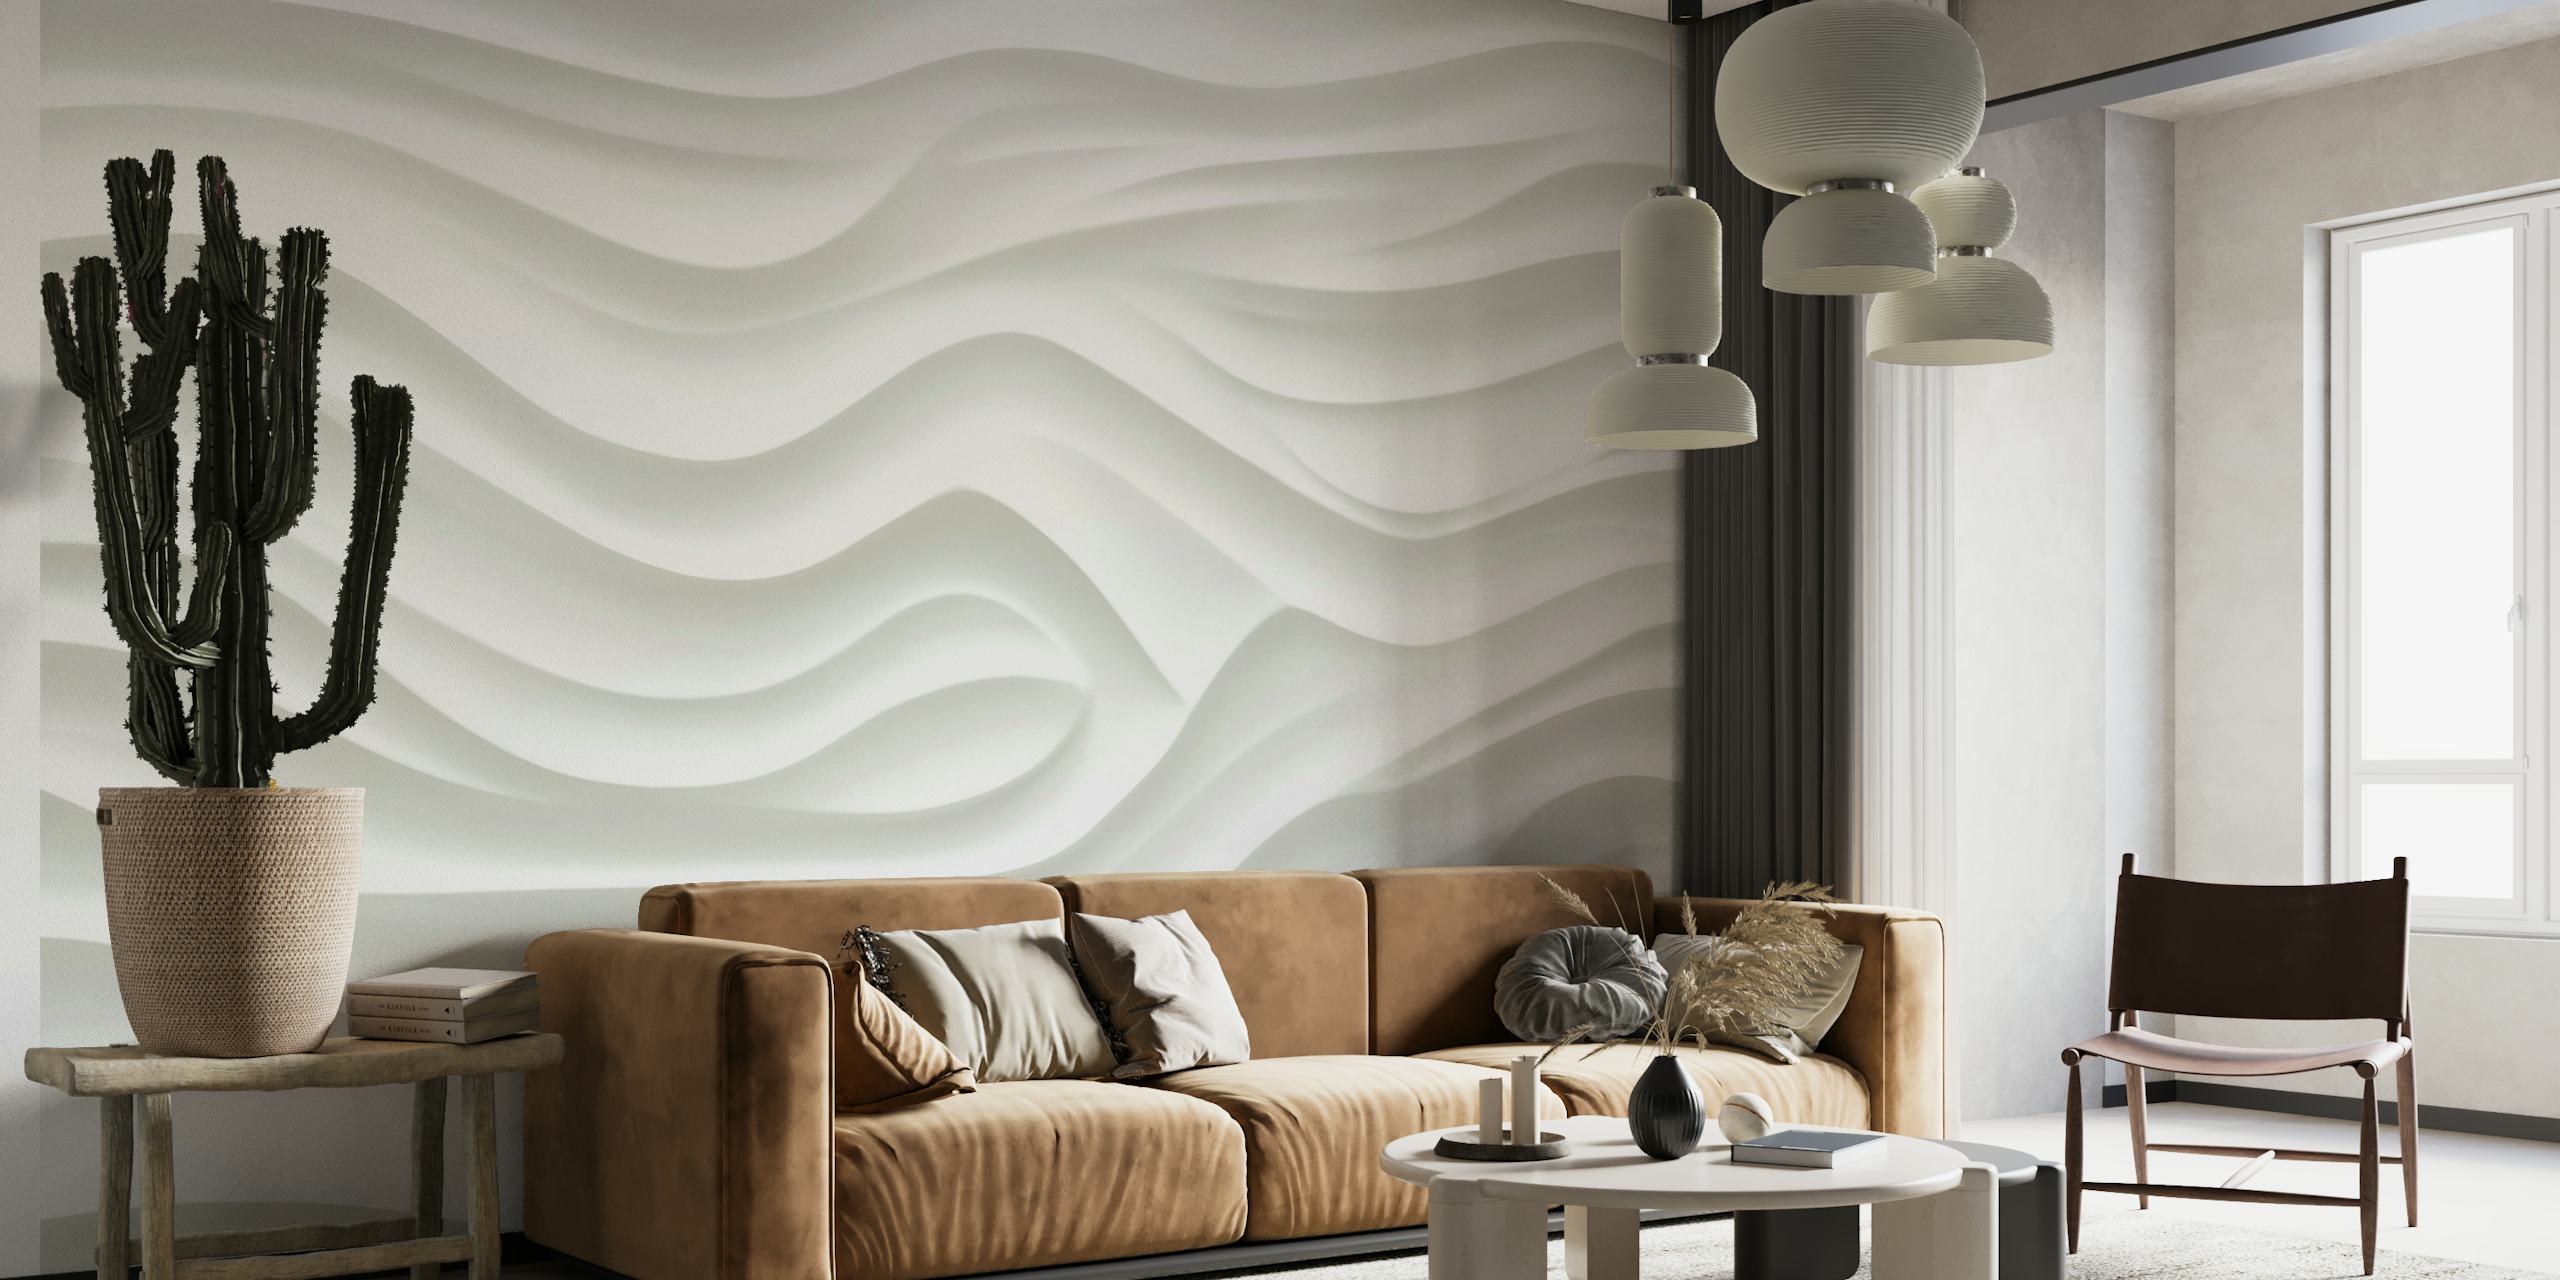 White embossed textured wall mural with a 3D-like sculptural surface effect.